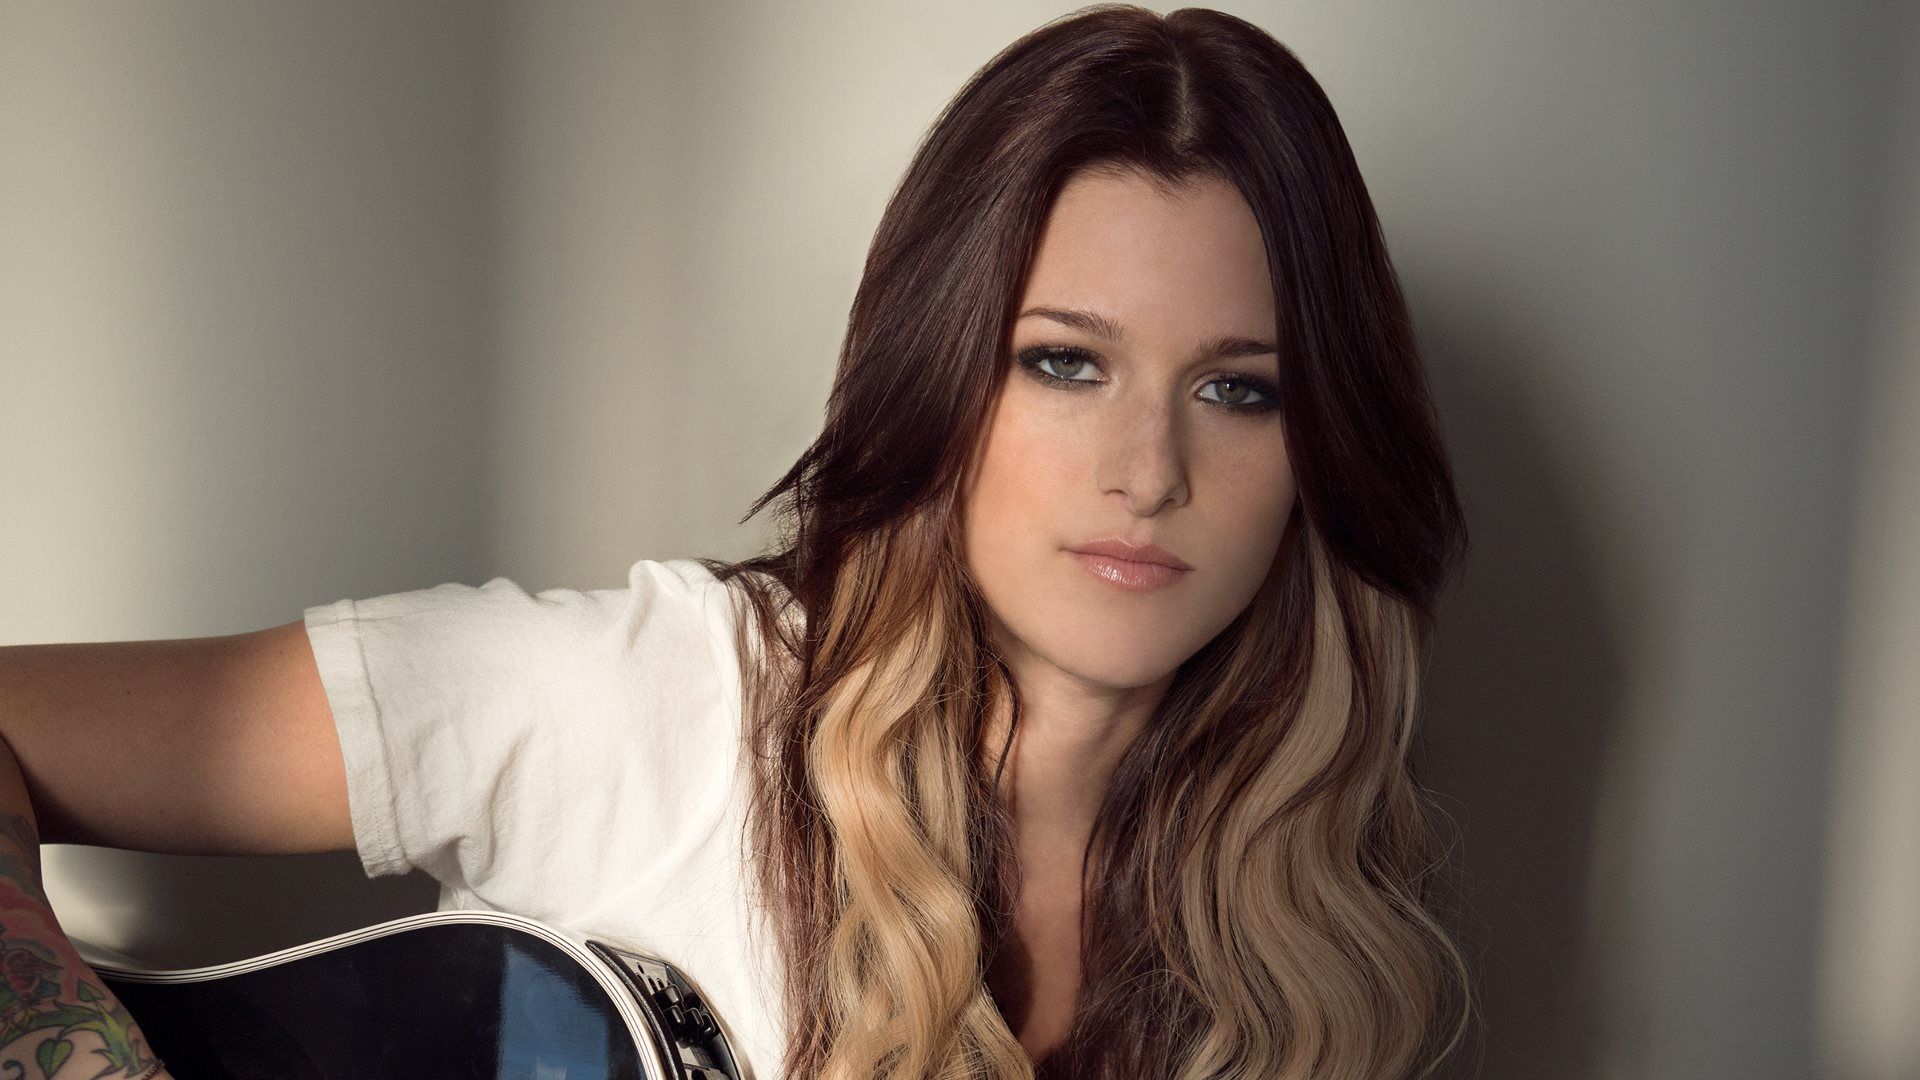 Cassadee Pope Wallpaper Image Photos Pictures Background